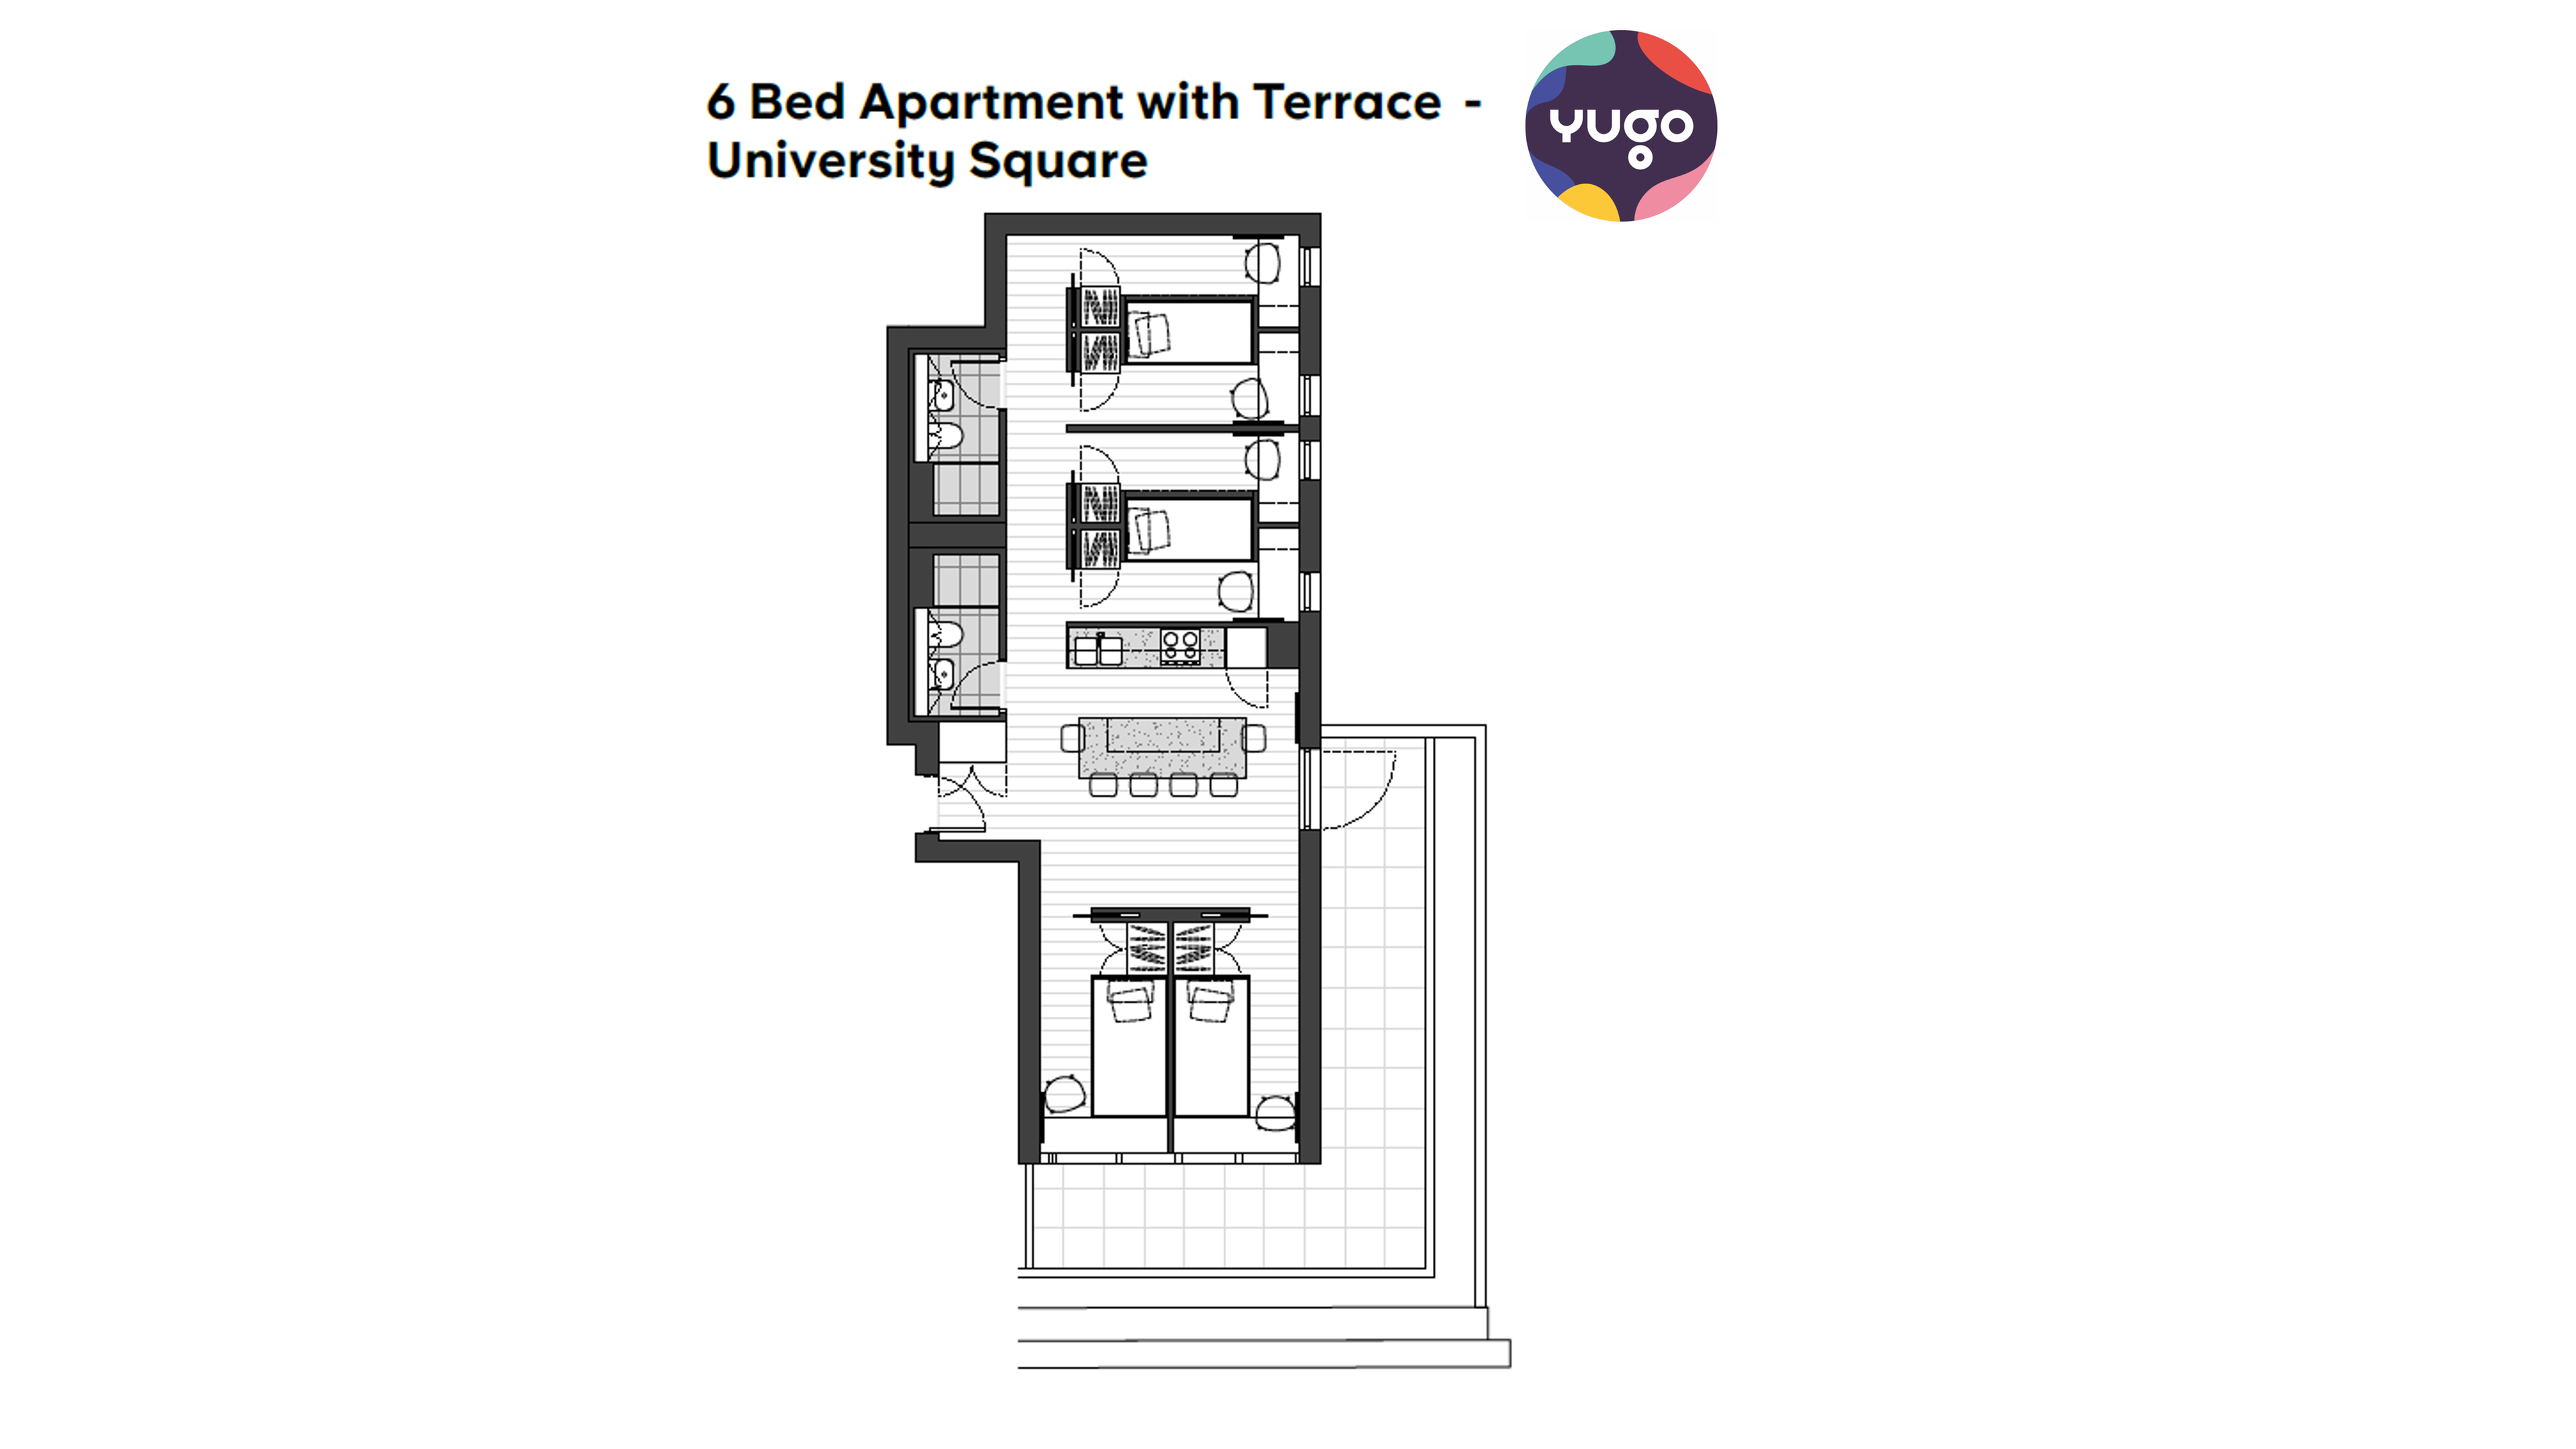 6 BA with Terrace image